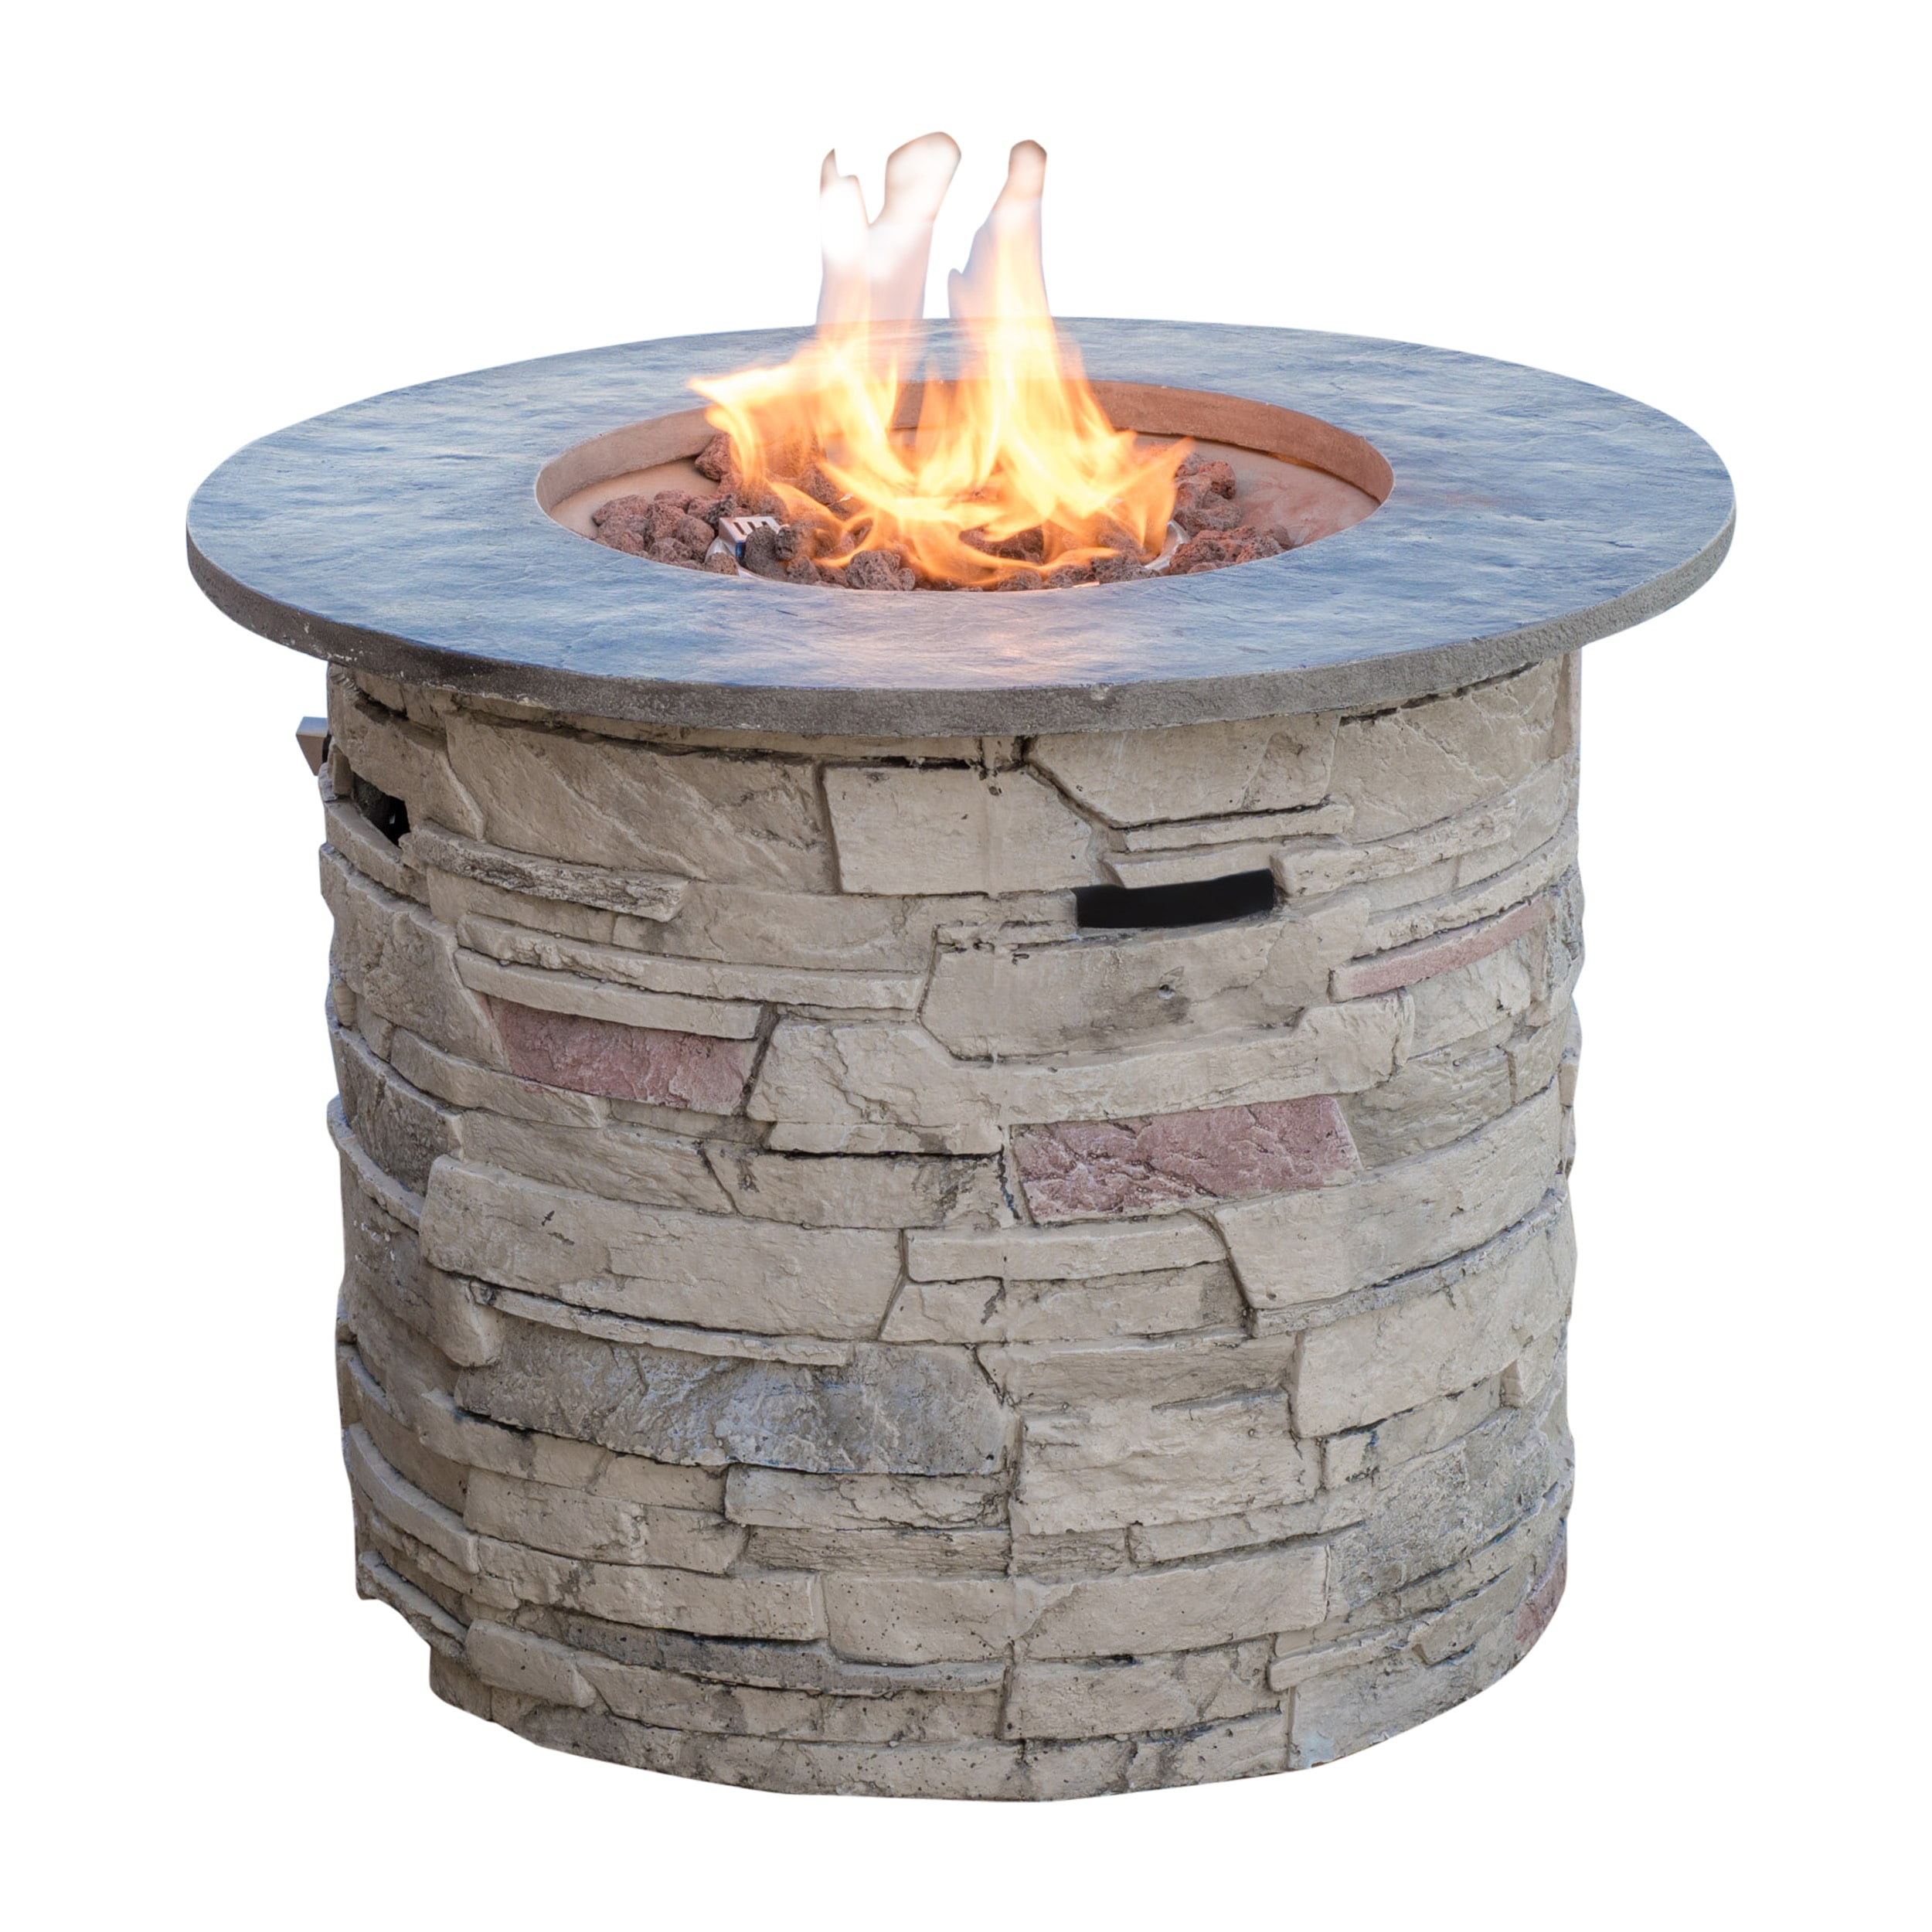 Grey Top Composite Outdoor Fireplace, Home Outdoor Fire Pit